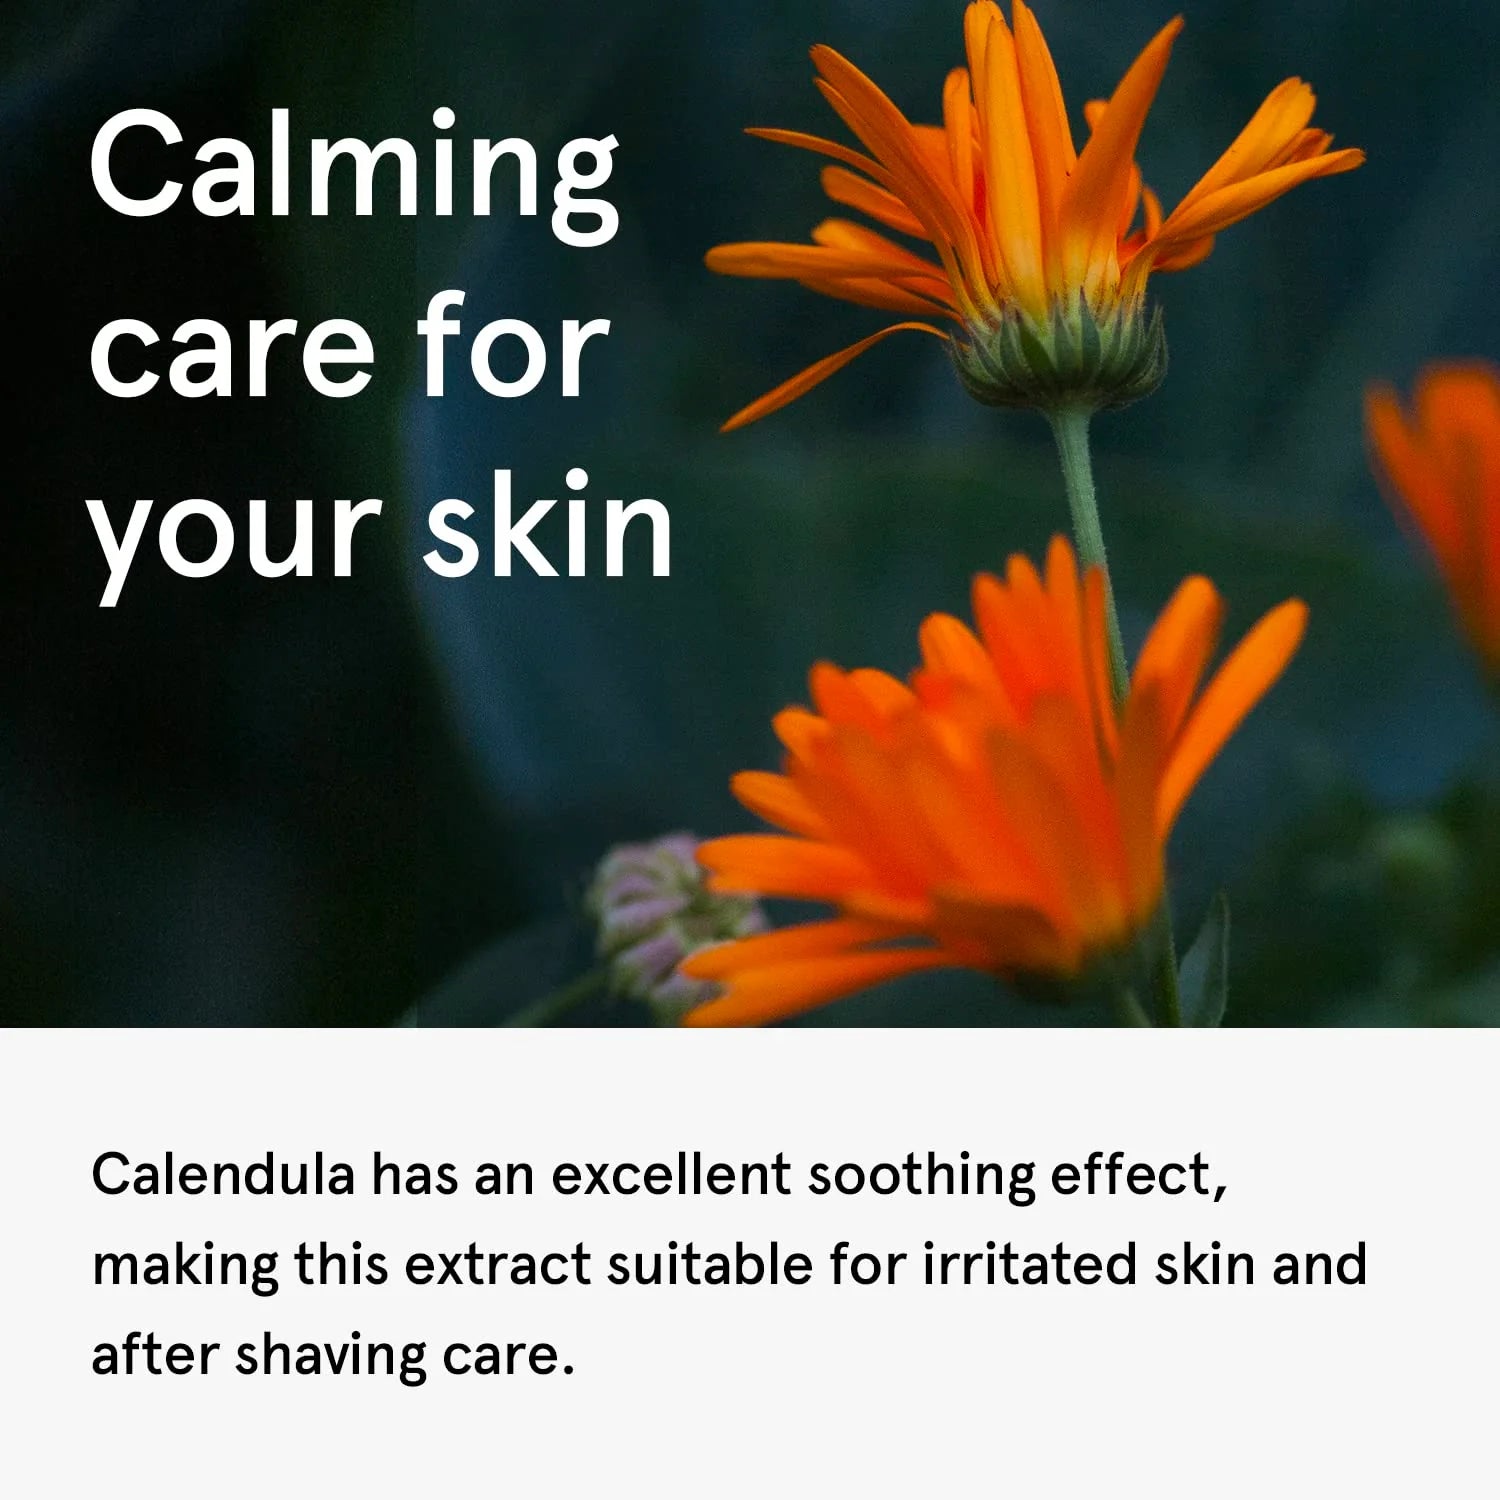 ONE THING Calendula Officinalis Flower Extract 150ml - DODOSKIN